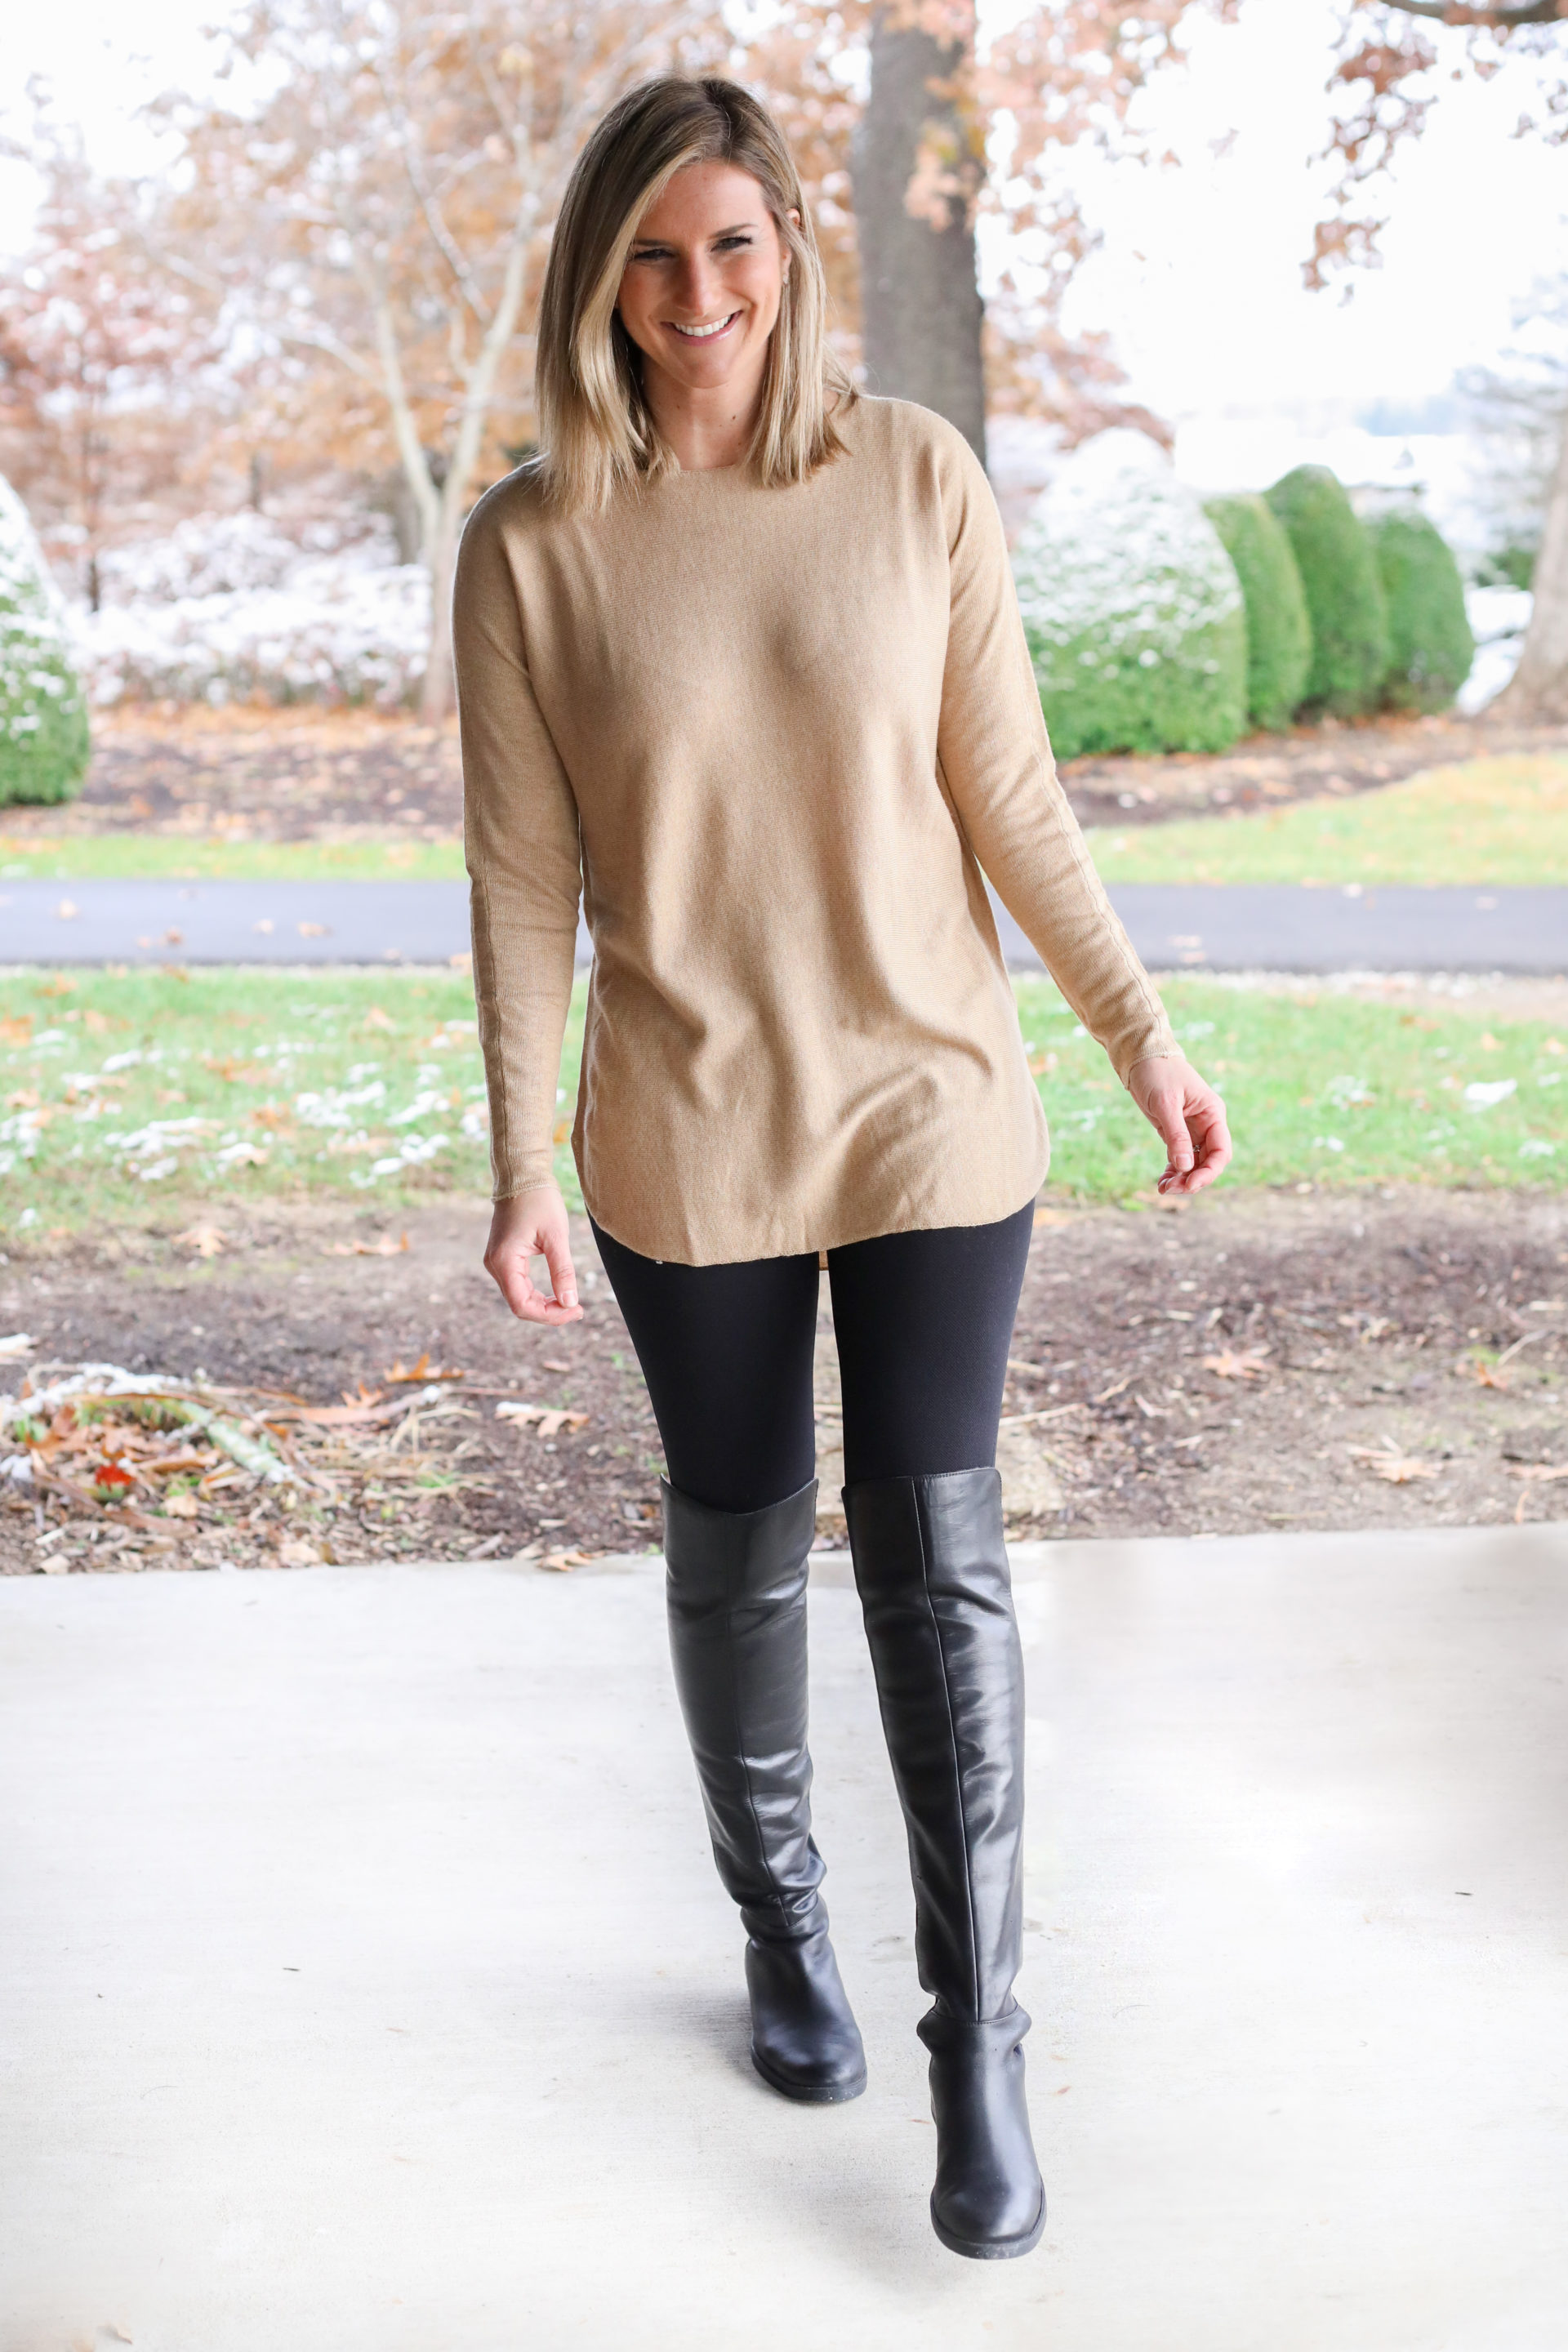 Tunic with leggings and boots  Dresses with leggings, Sweater